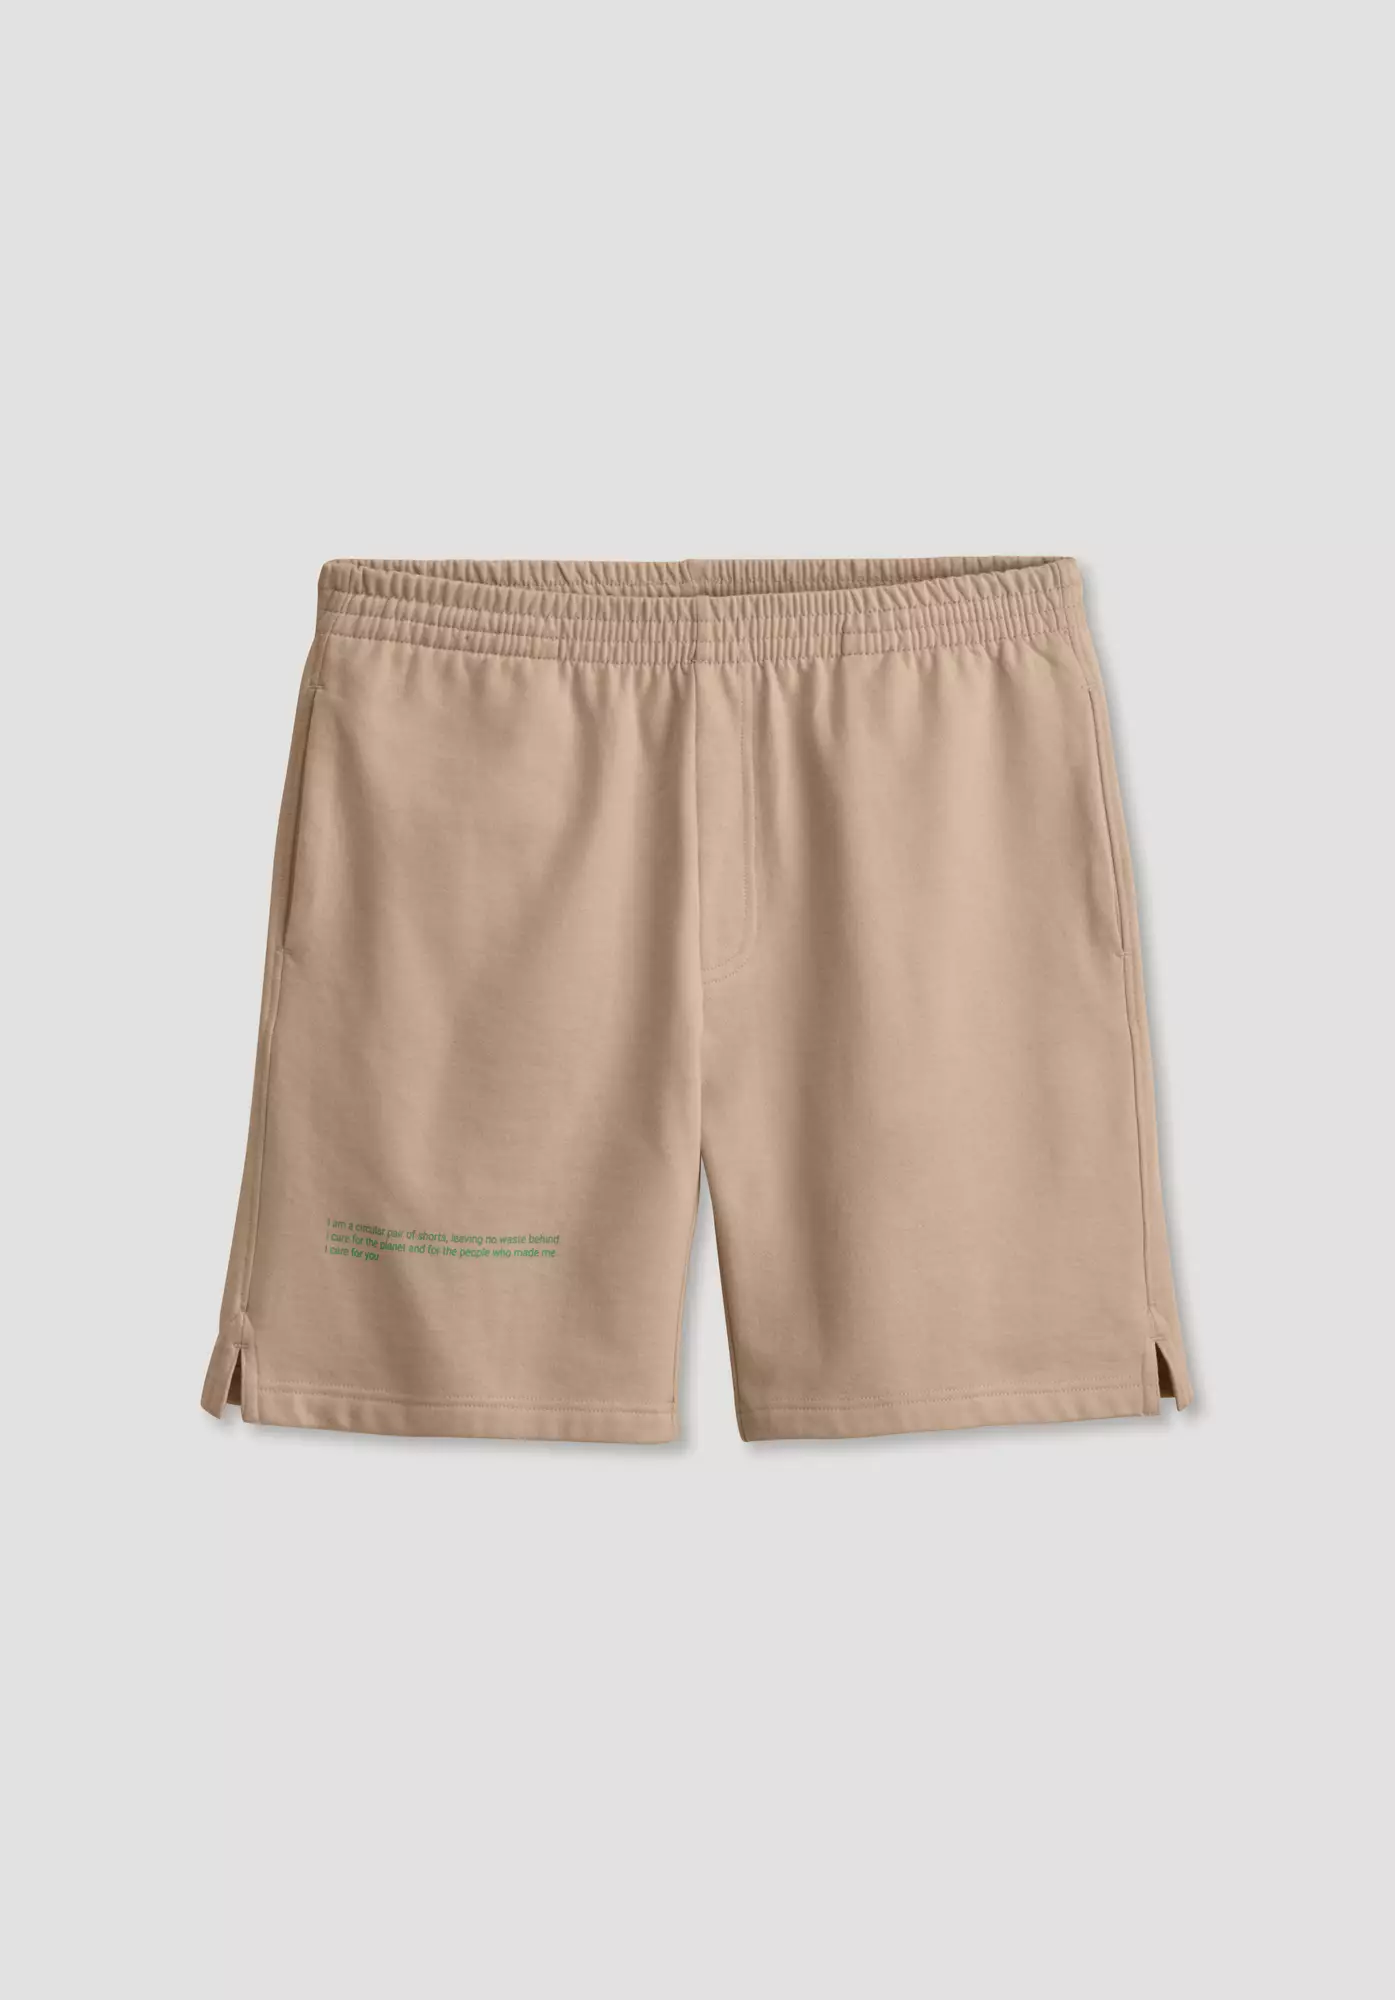 Cradle to cradle shorts made from pure organic cotton - 4